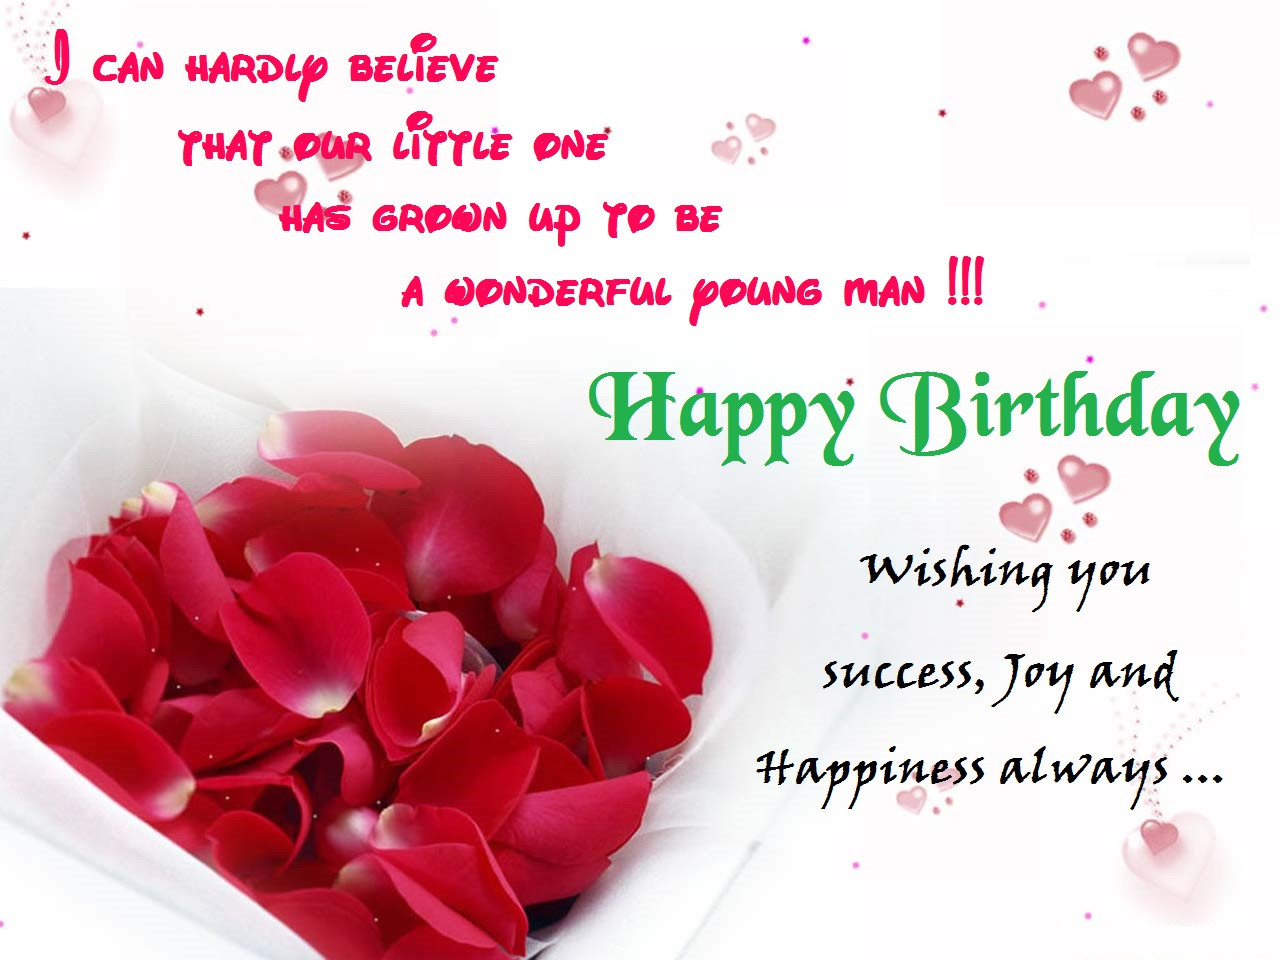 Birthday Wishes And Quotes
 Happy Birthday Wishes Quotes SMS Messages ECards